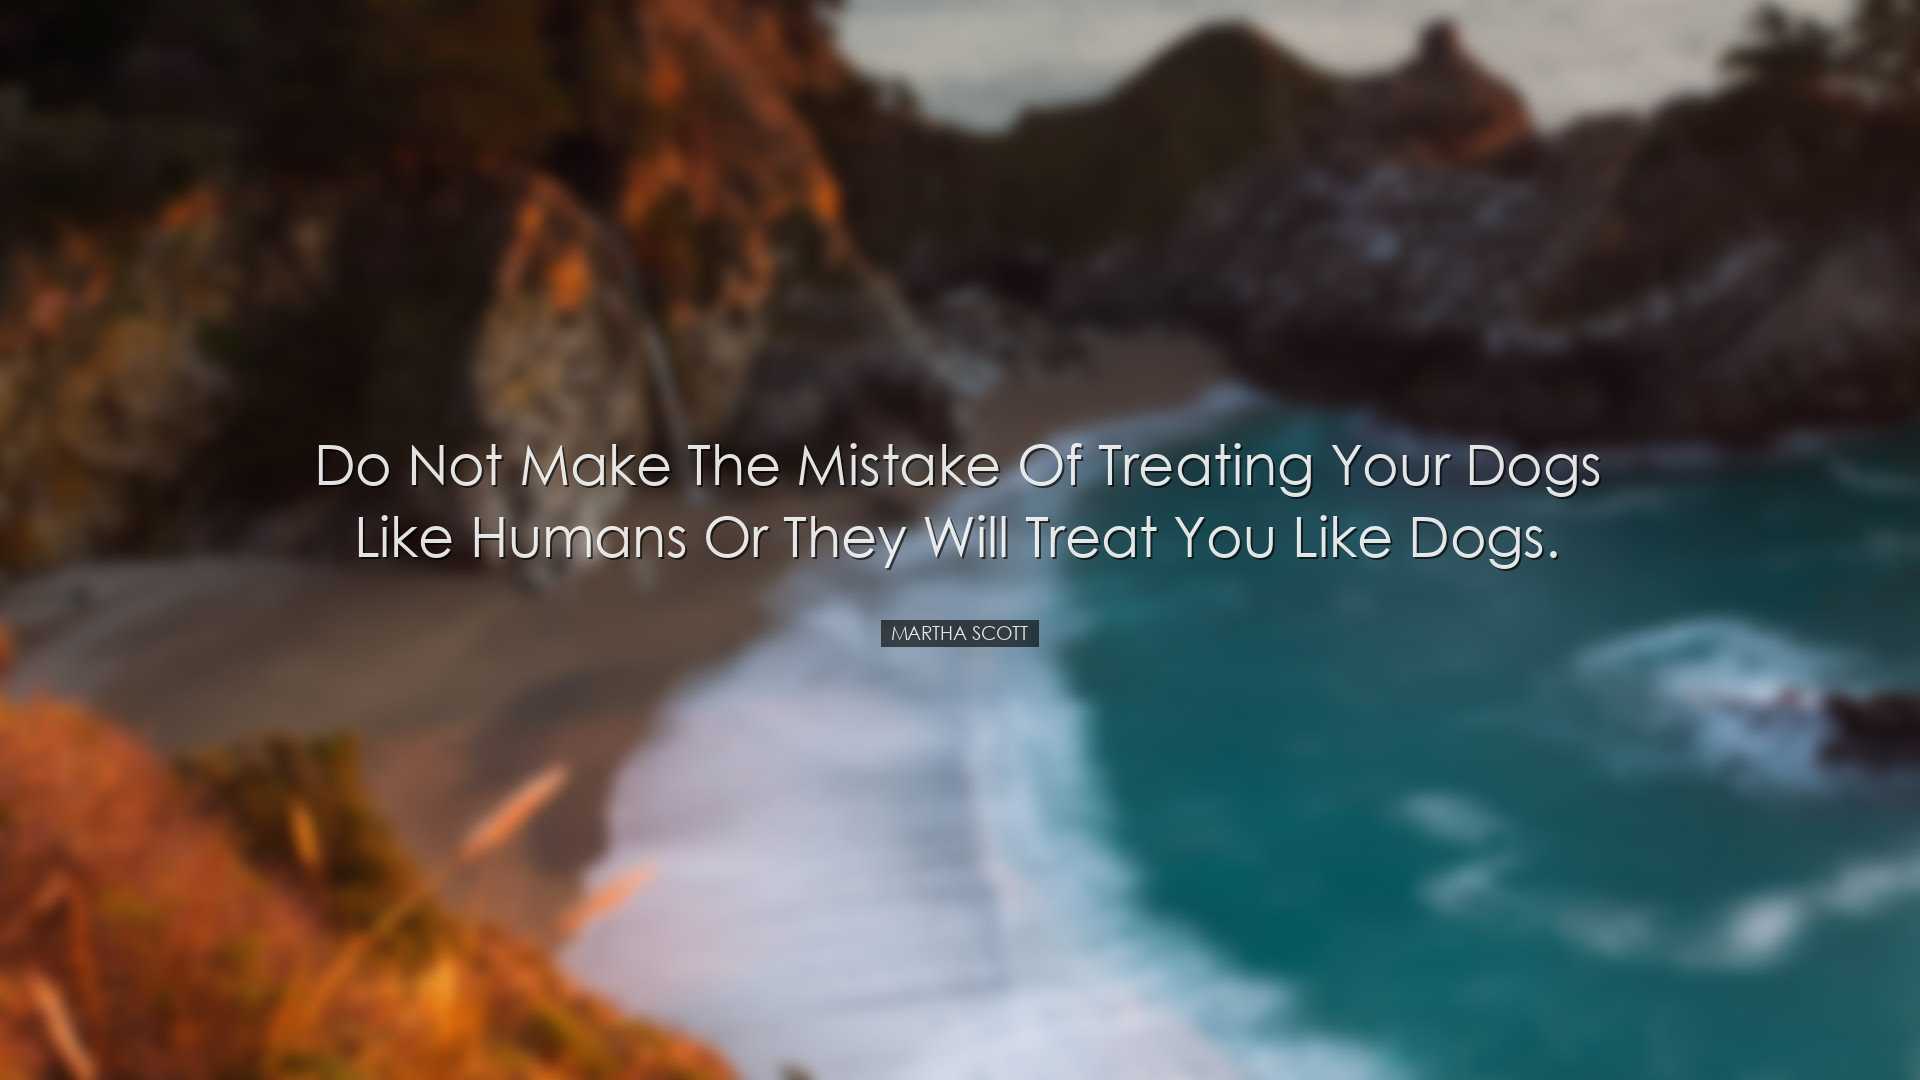 Do not make the mistake of treating your dogs like humans or they